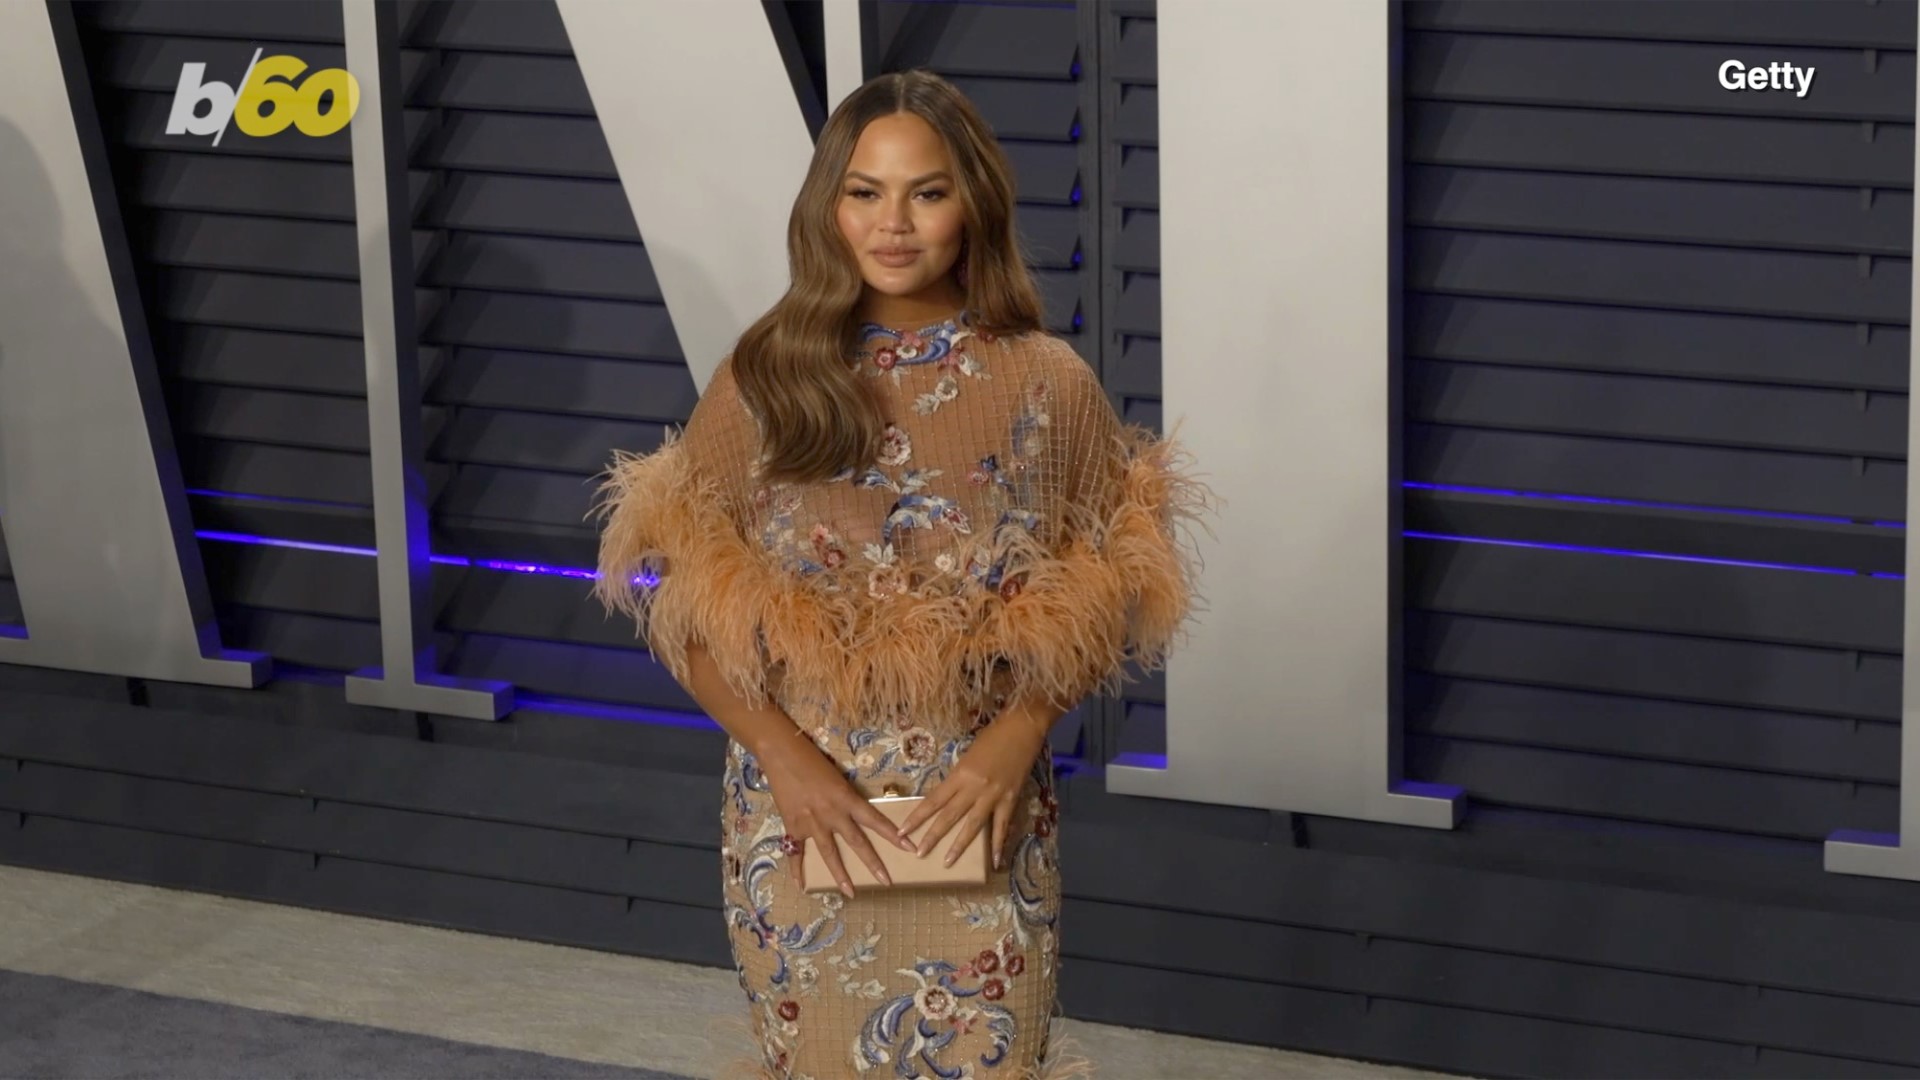 Supermodel Chrissy Teigen posted a video of her getting Botox in her armpits to stop sweating! Buzz60's Lenneia Batiste has more on how it works.